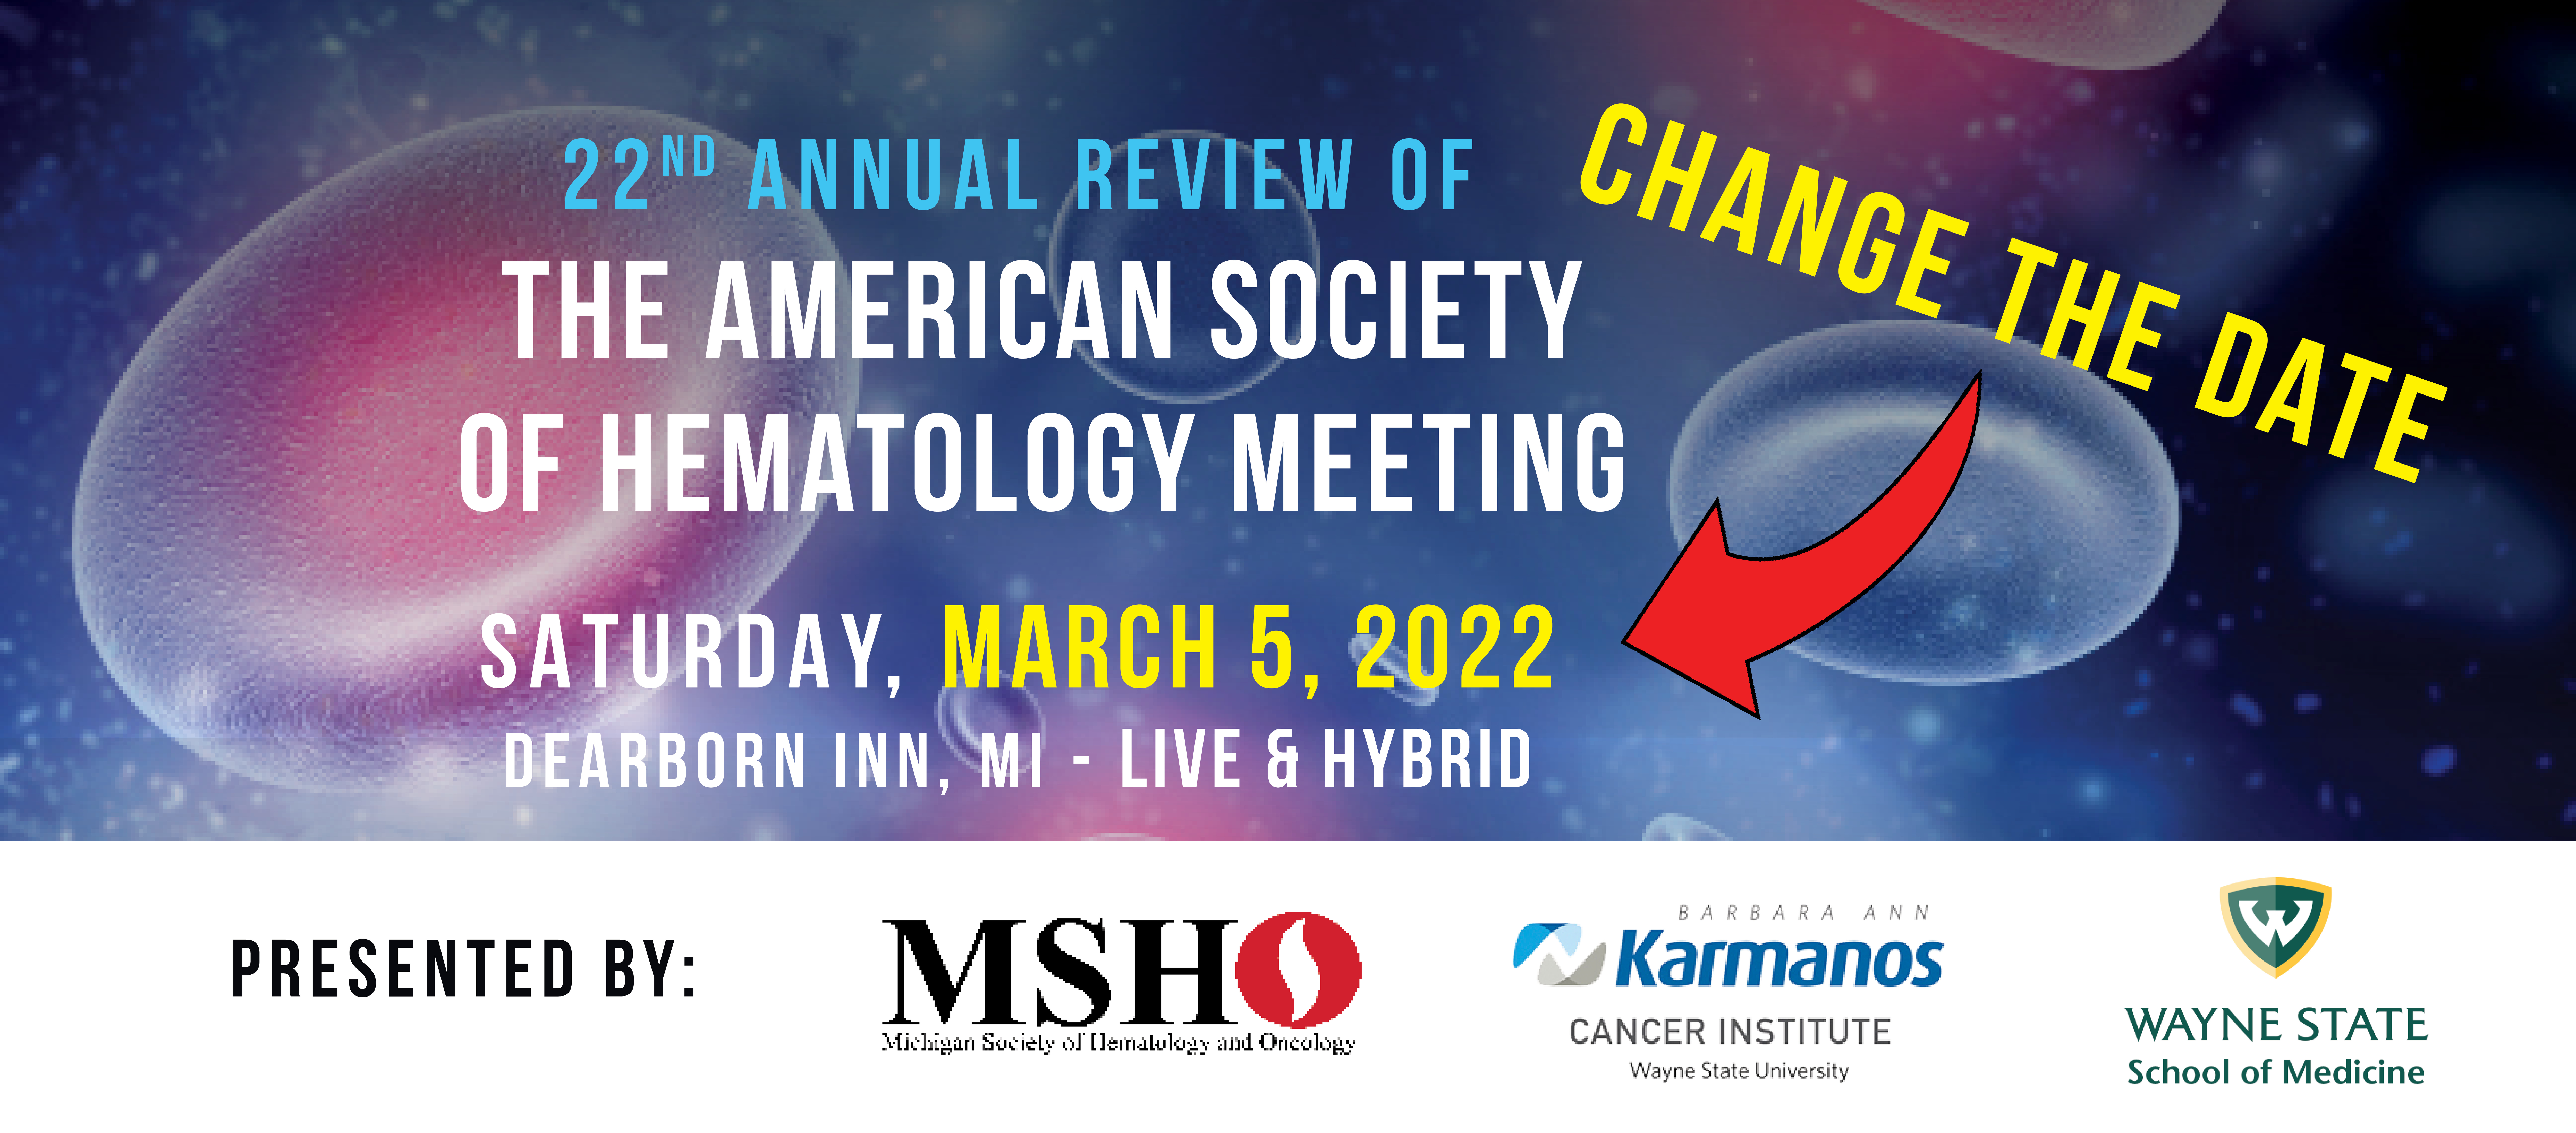 [Duplicate] [Duplicate] 22nd Annual Review of the American Society of Hematology Meeting